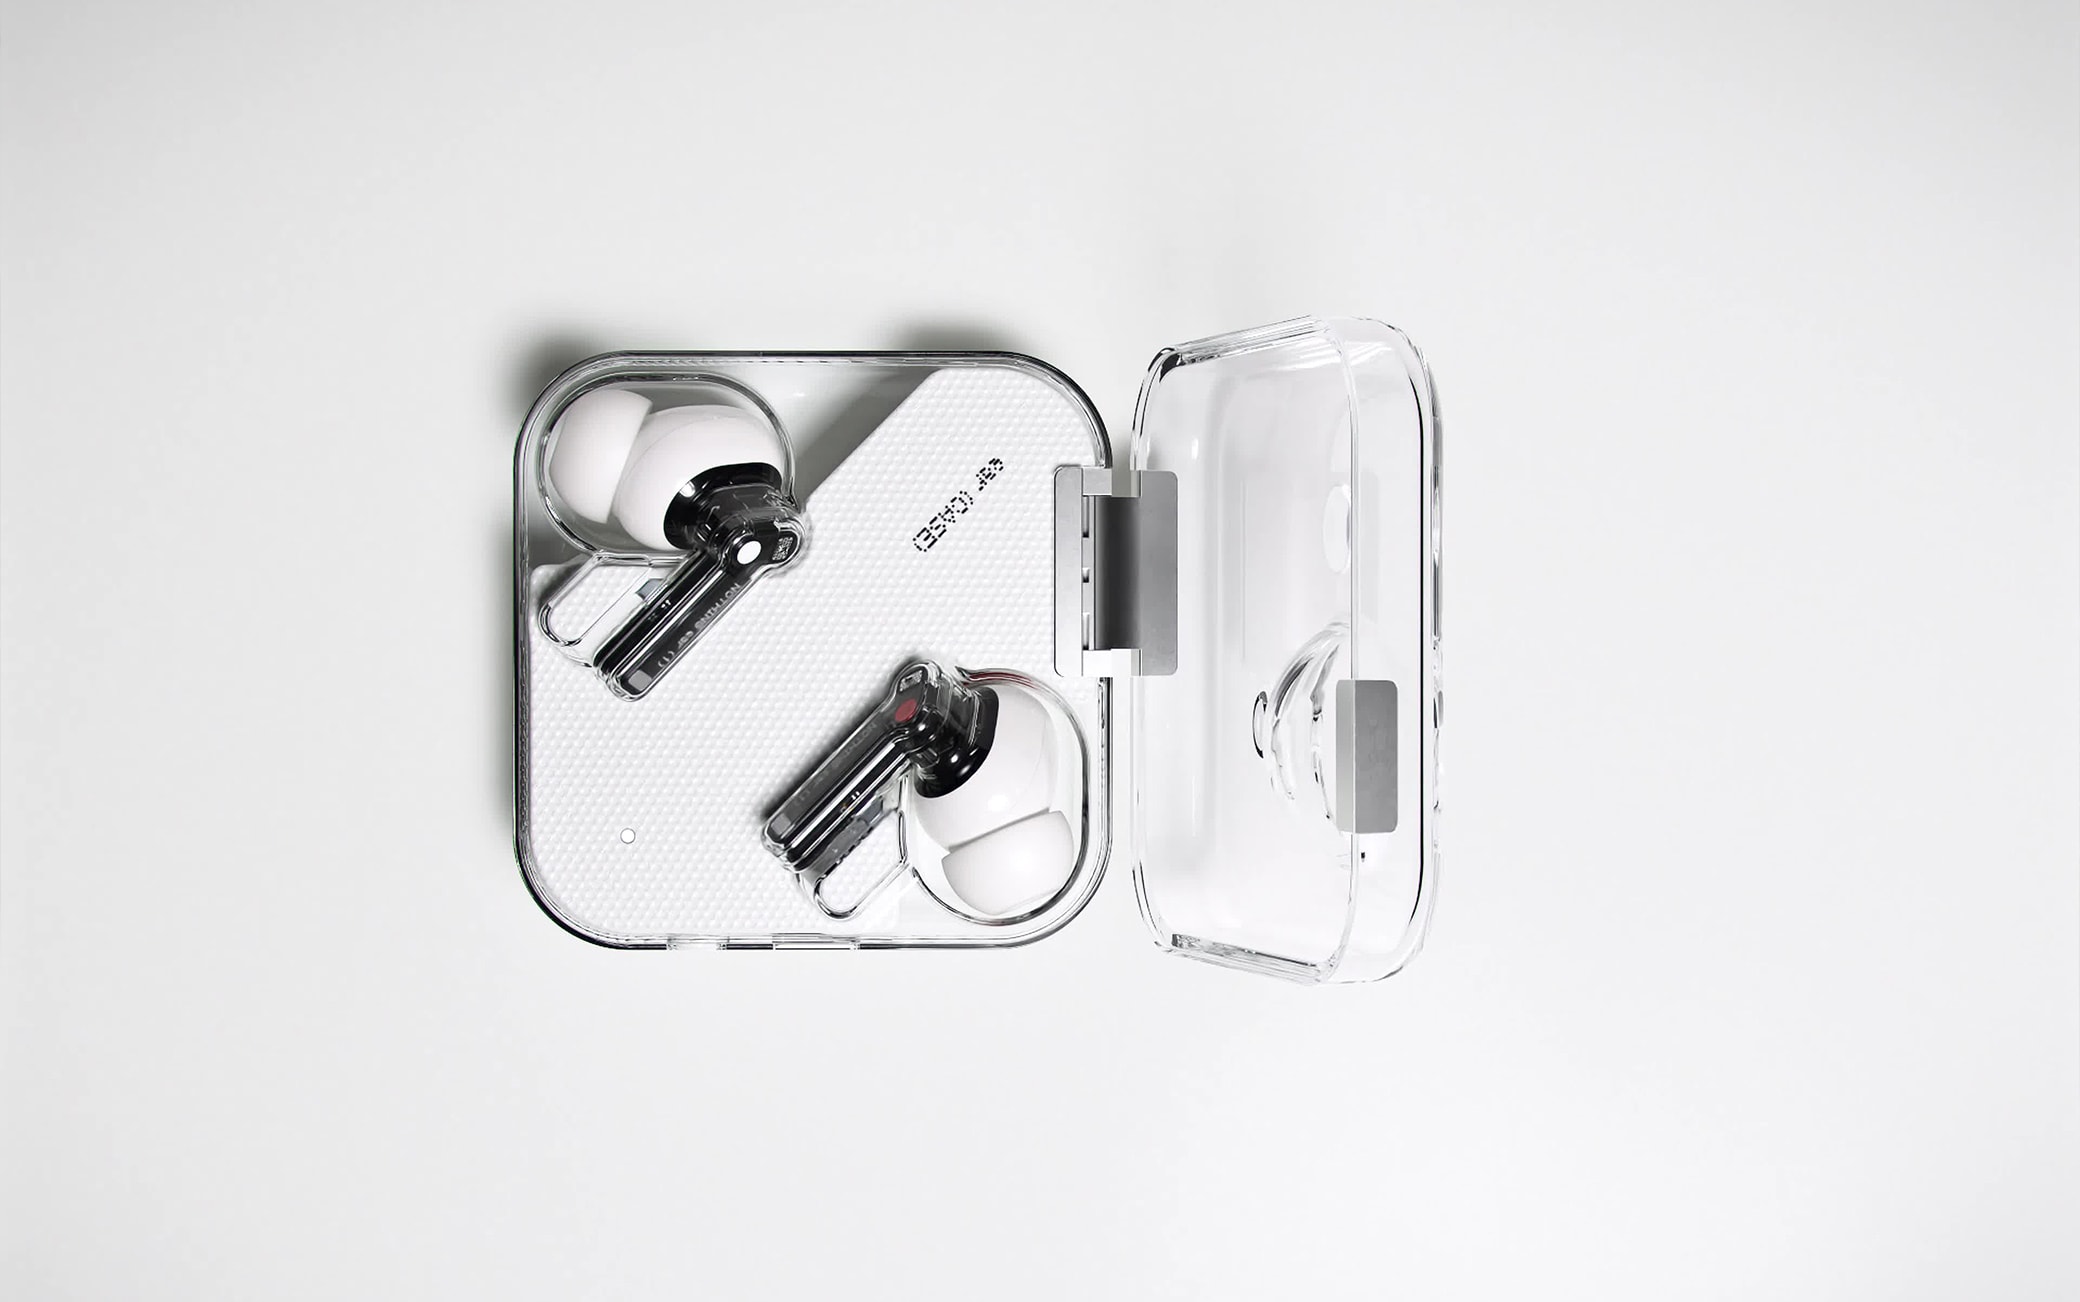 Nothing ear (1), wireless headphones with a transparent design